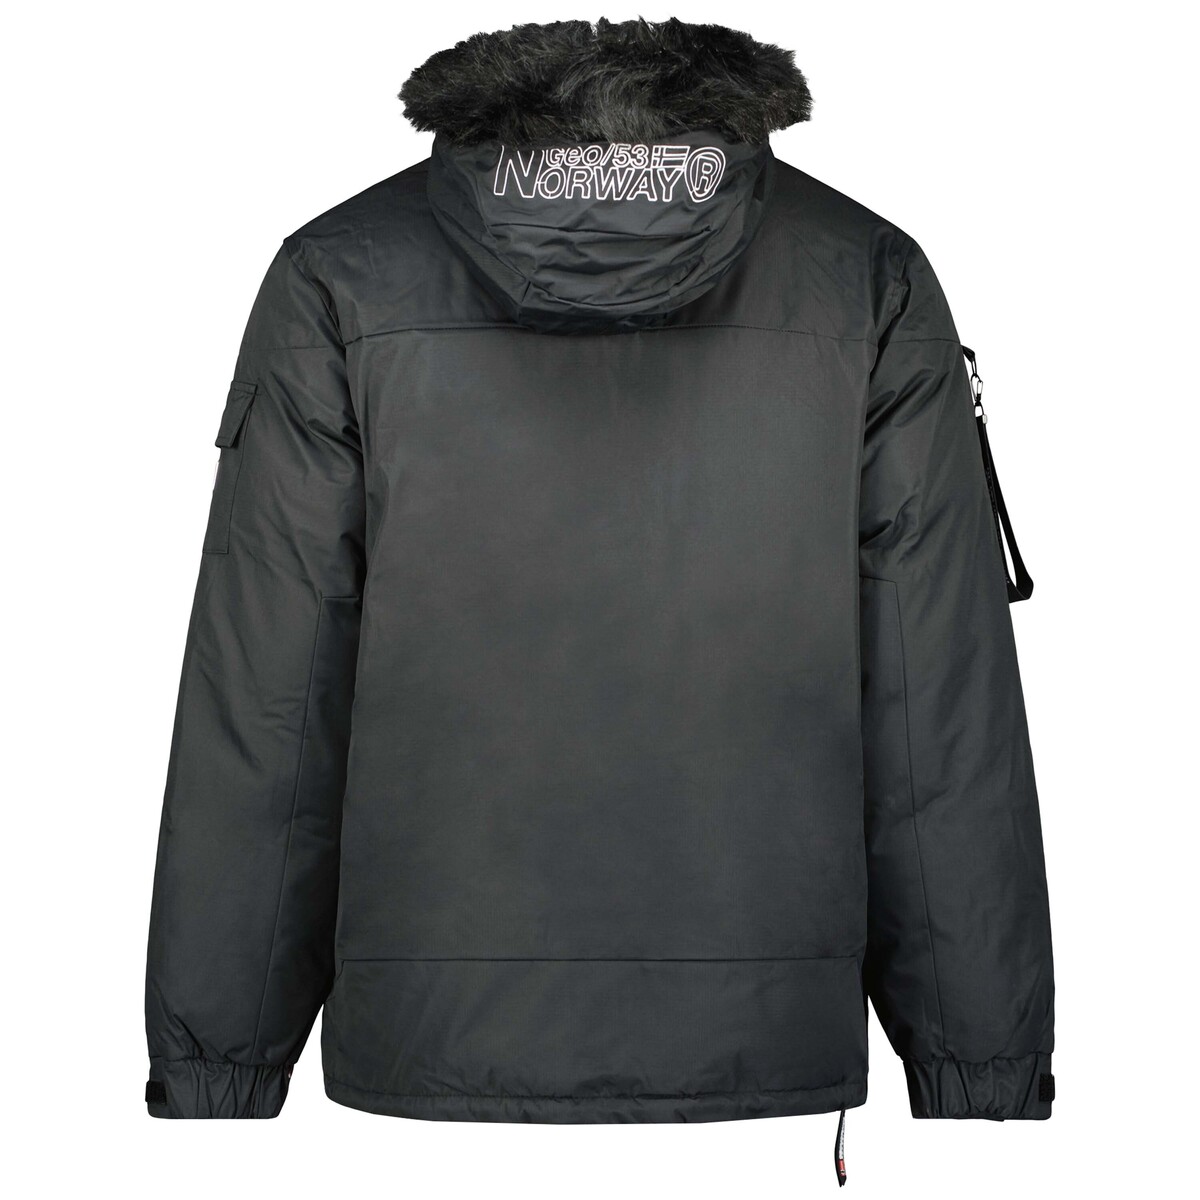 Geographical Norway Noir BRUNO Wj0OAeUc